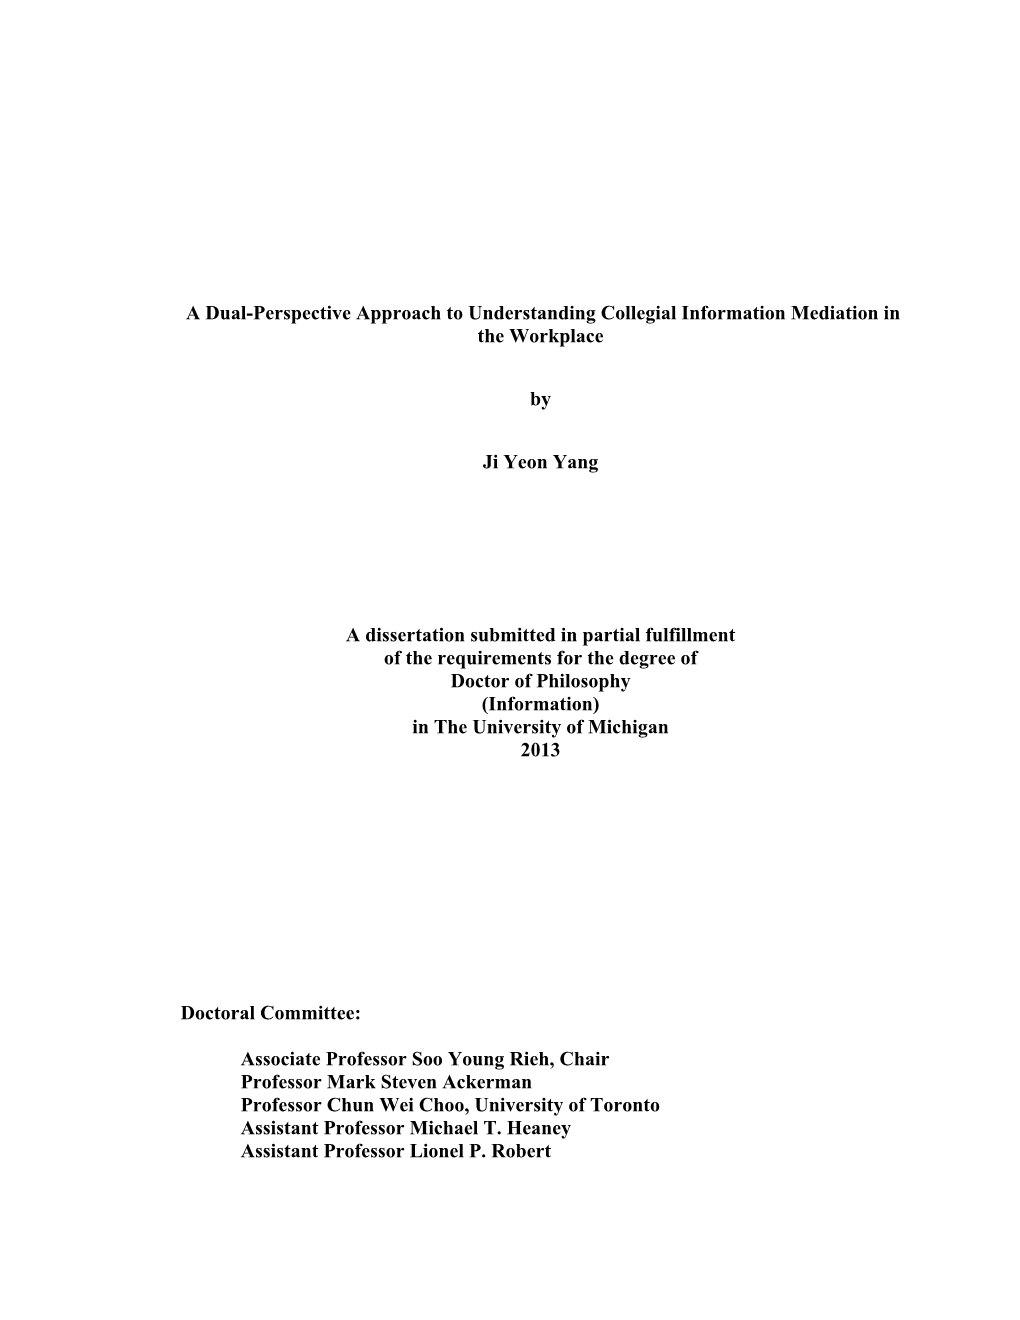 A Dual-Perspective Approach to Understanding Collegial Information Mediation in the Workplace by Ji Yeon Yang a Dissertation